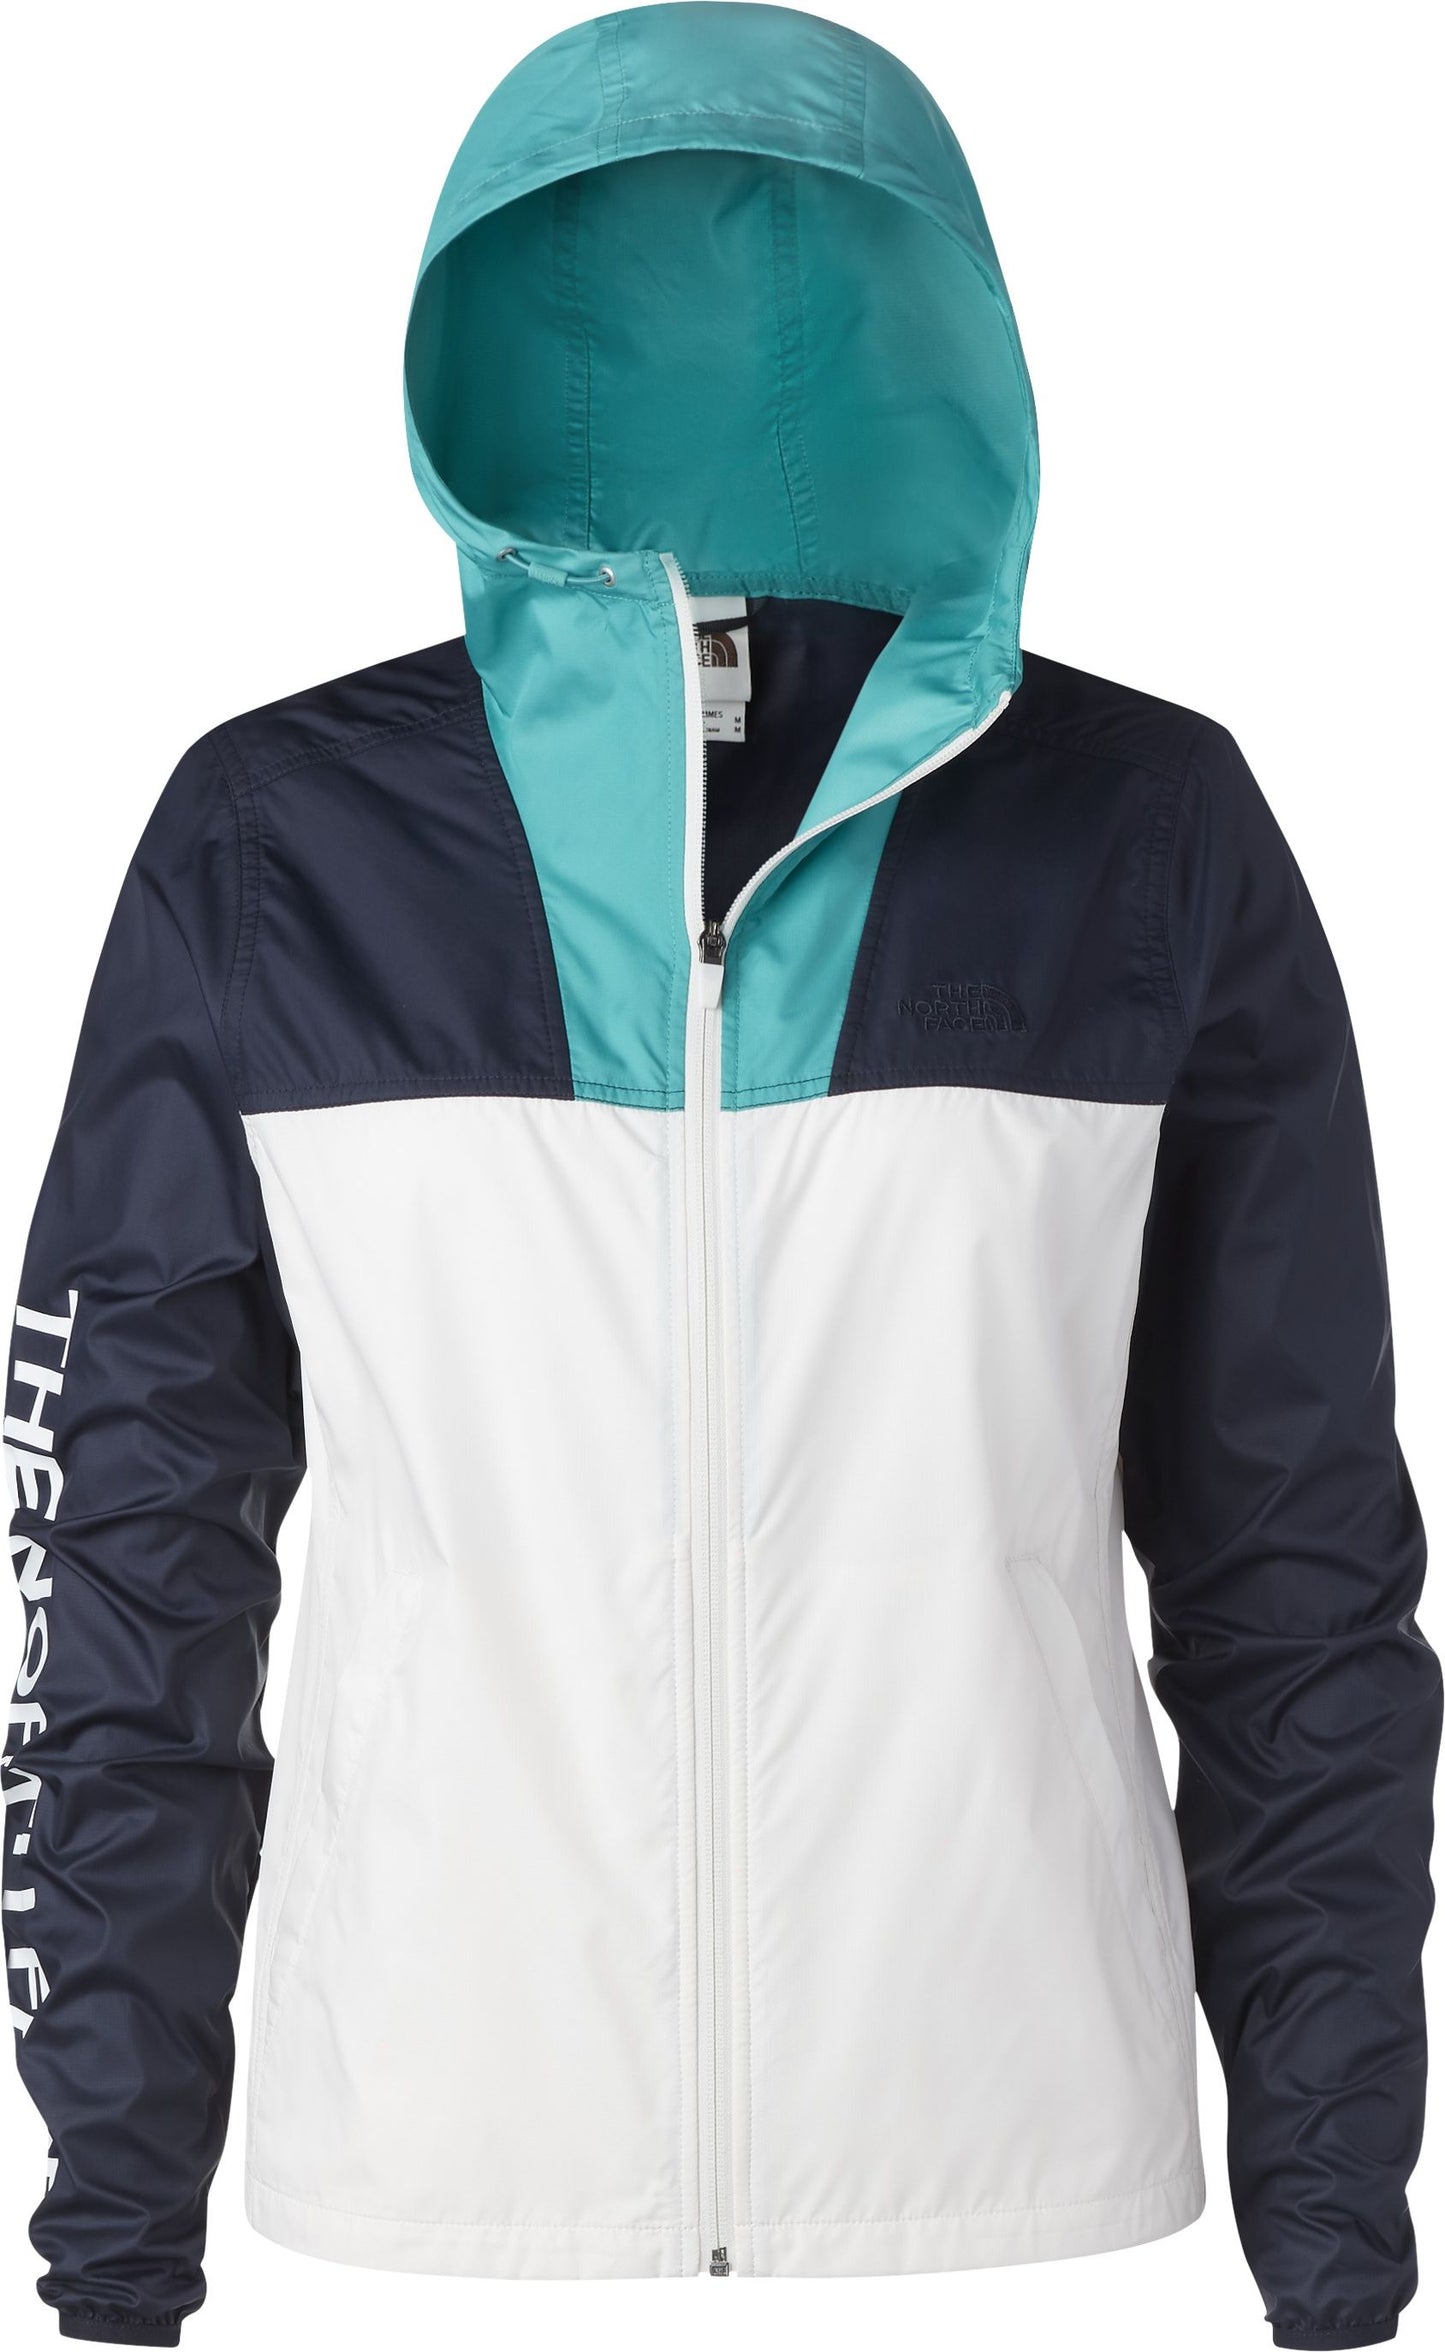 The North Face Apparel Women's Graphic Cyclone Jacket Porcelain Green/aviator Navy/gardenia White